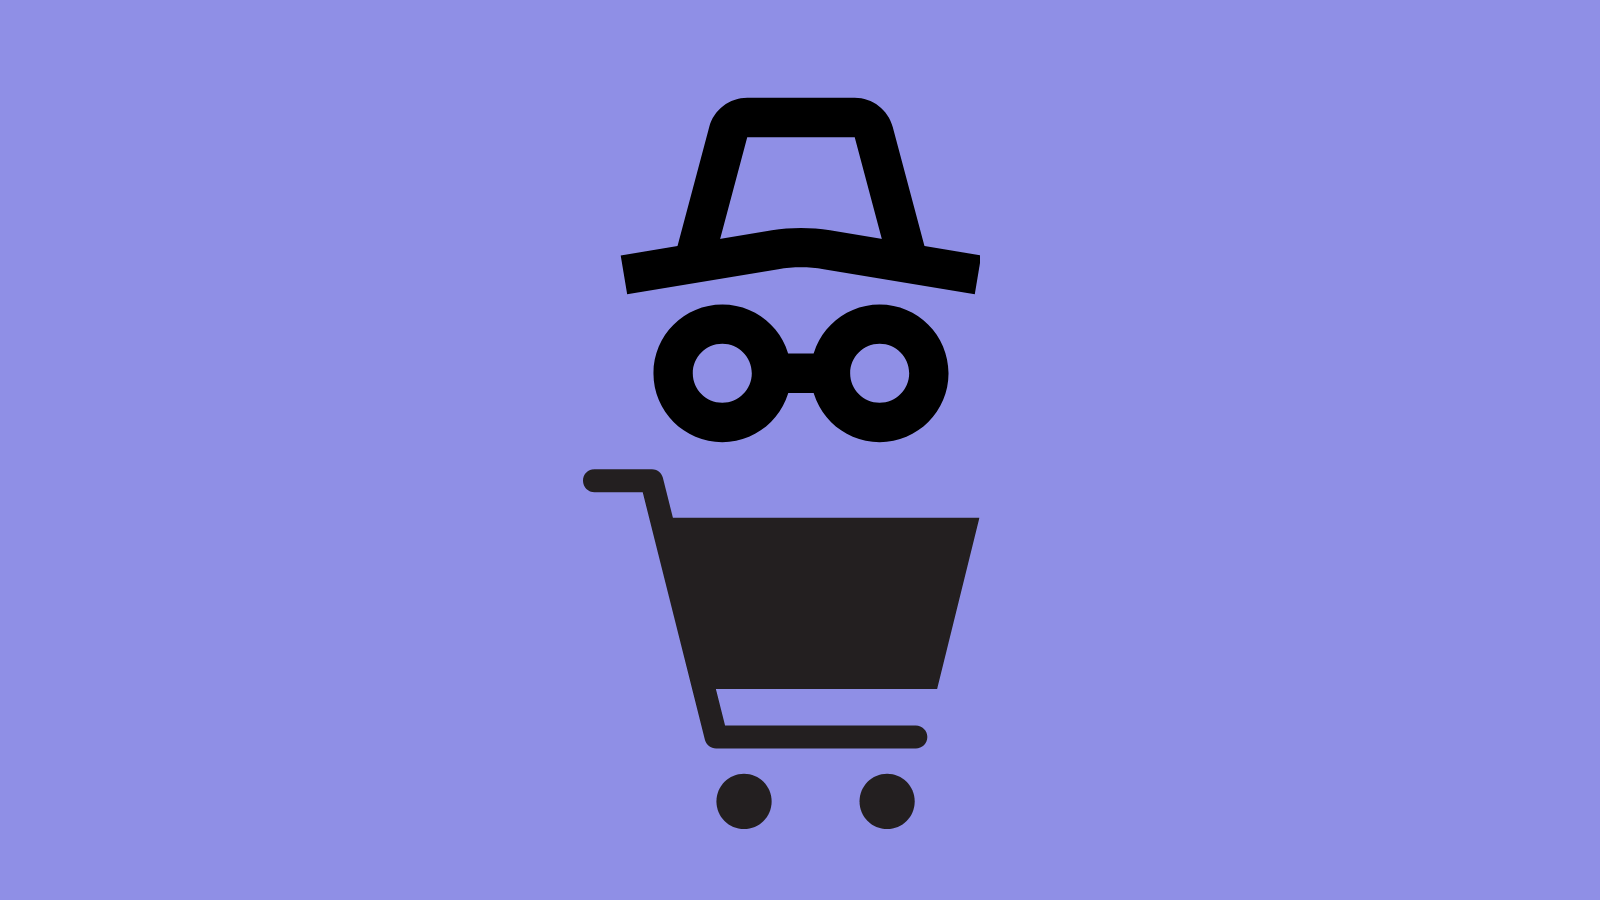 An incognito icon (a hat over a pair of glasses) over a shopping cart icon